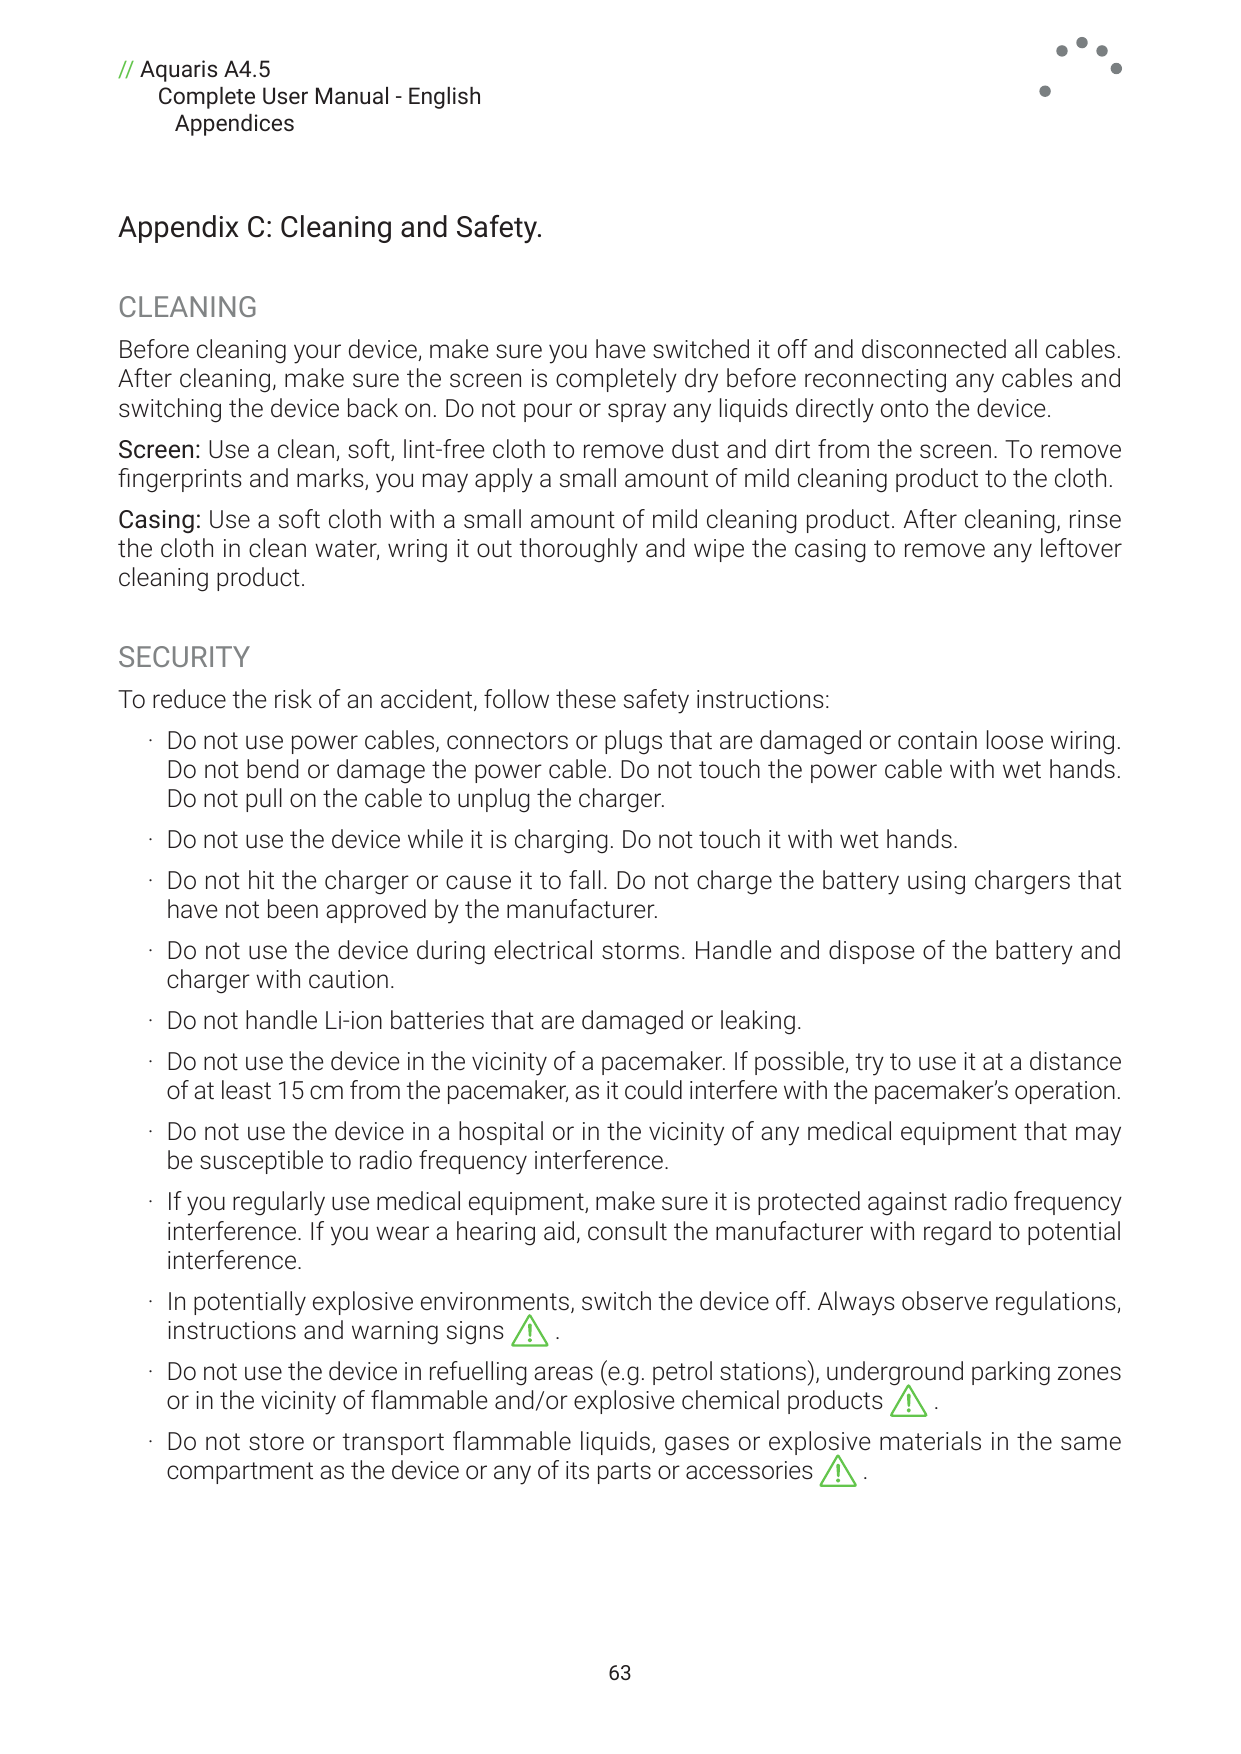 // Aquaris A4.5Complete User Manual - EnglishAppendicesAppendix C: Cleaning and Safety.CLEANINGBefore cleaning your device, make